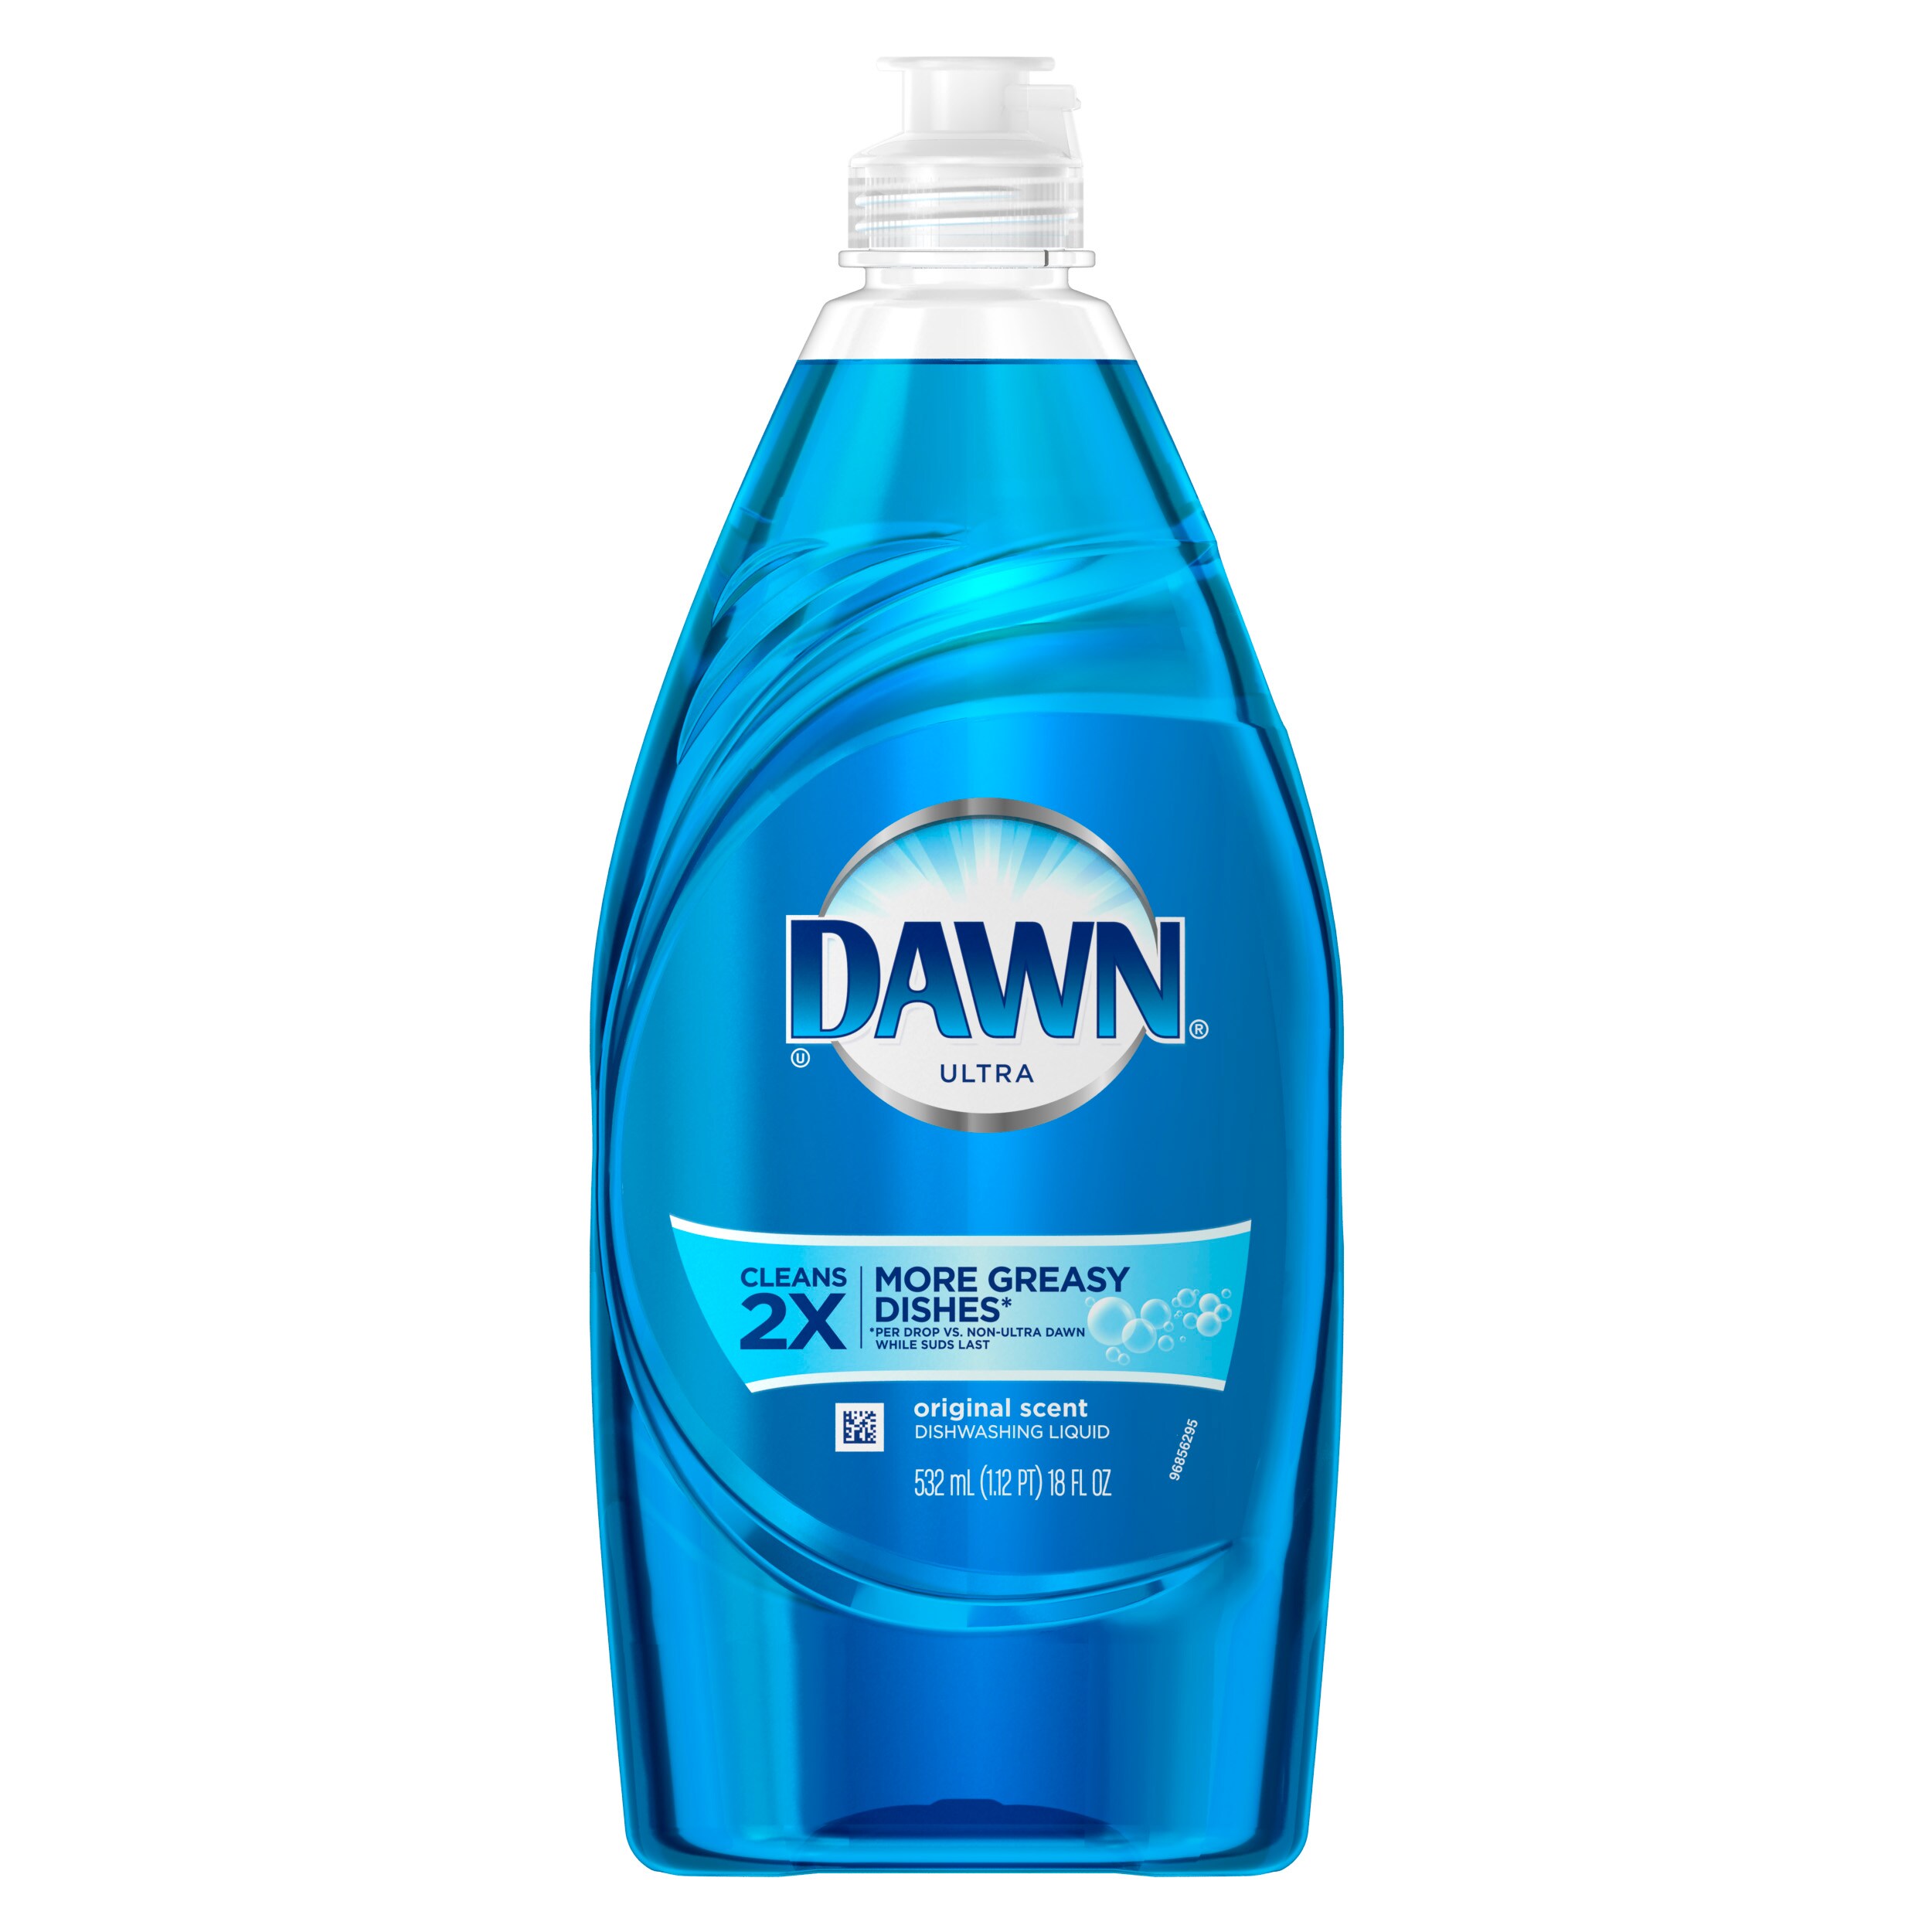 Can You Use Dawn Dish Soap on Baby Bottles - babynfun